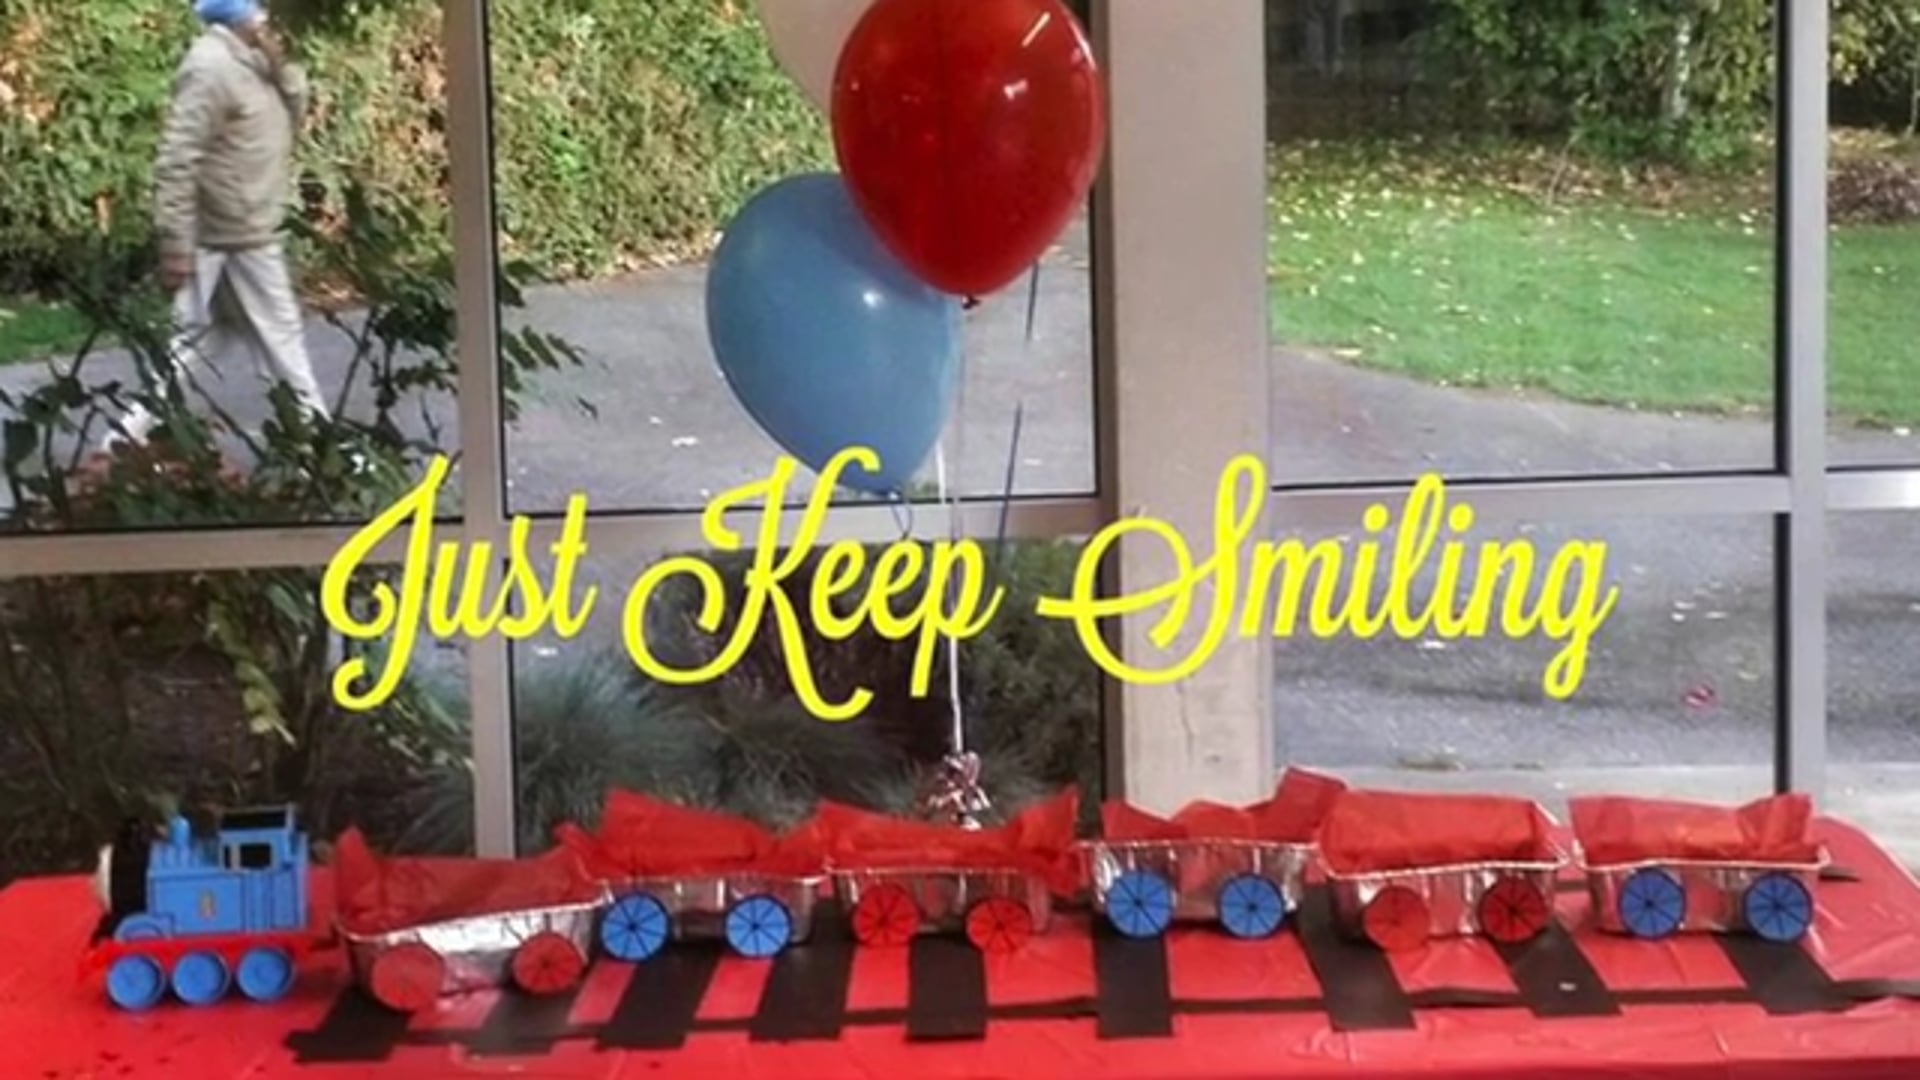 Promotional video thumbnail 1 for Just Keep Smiling